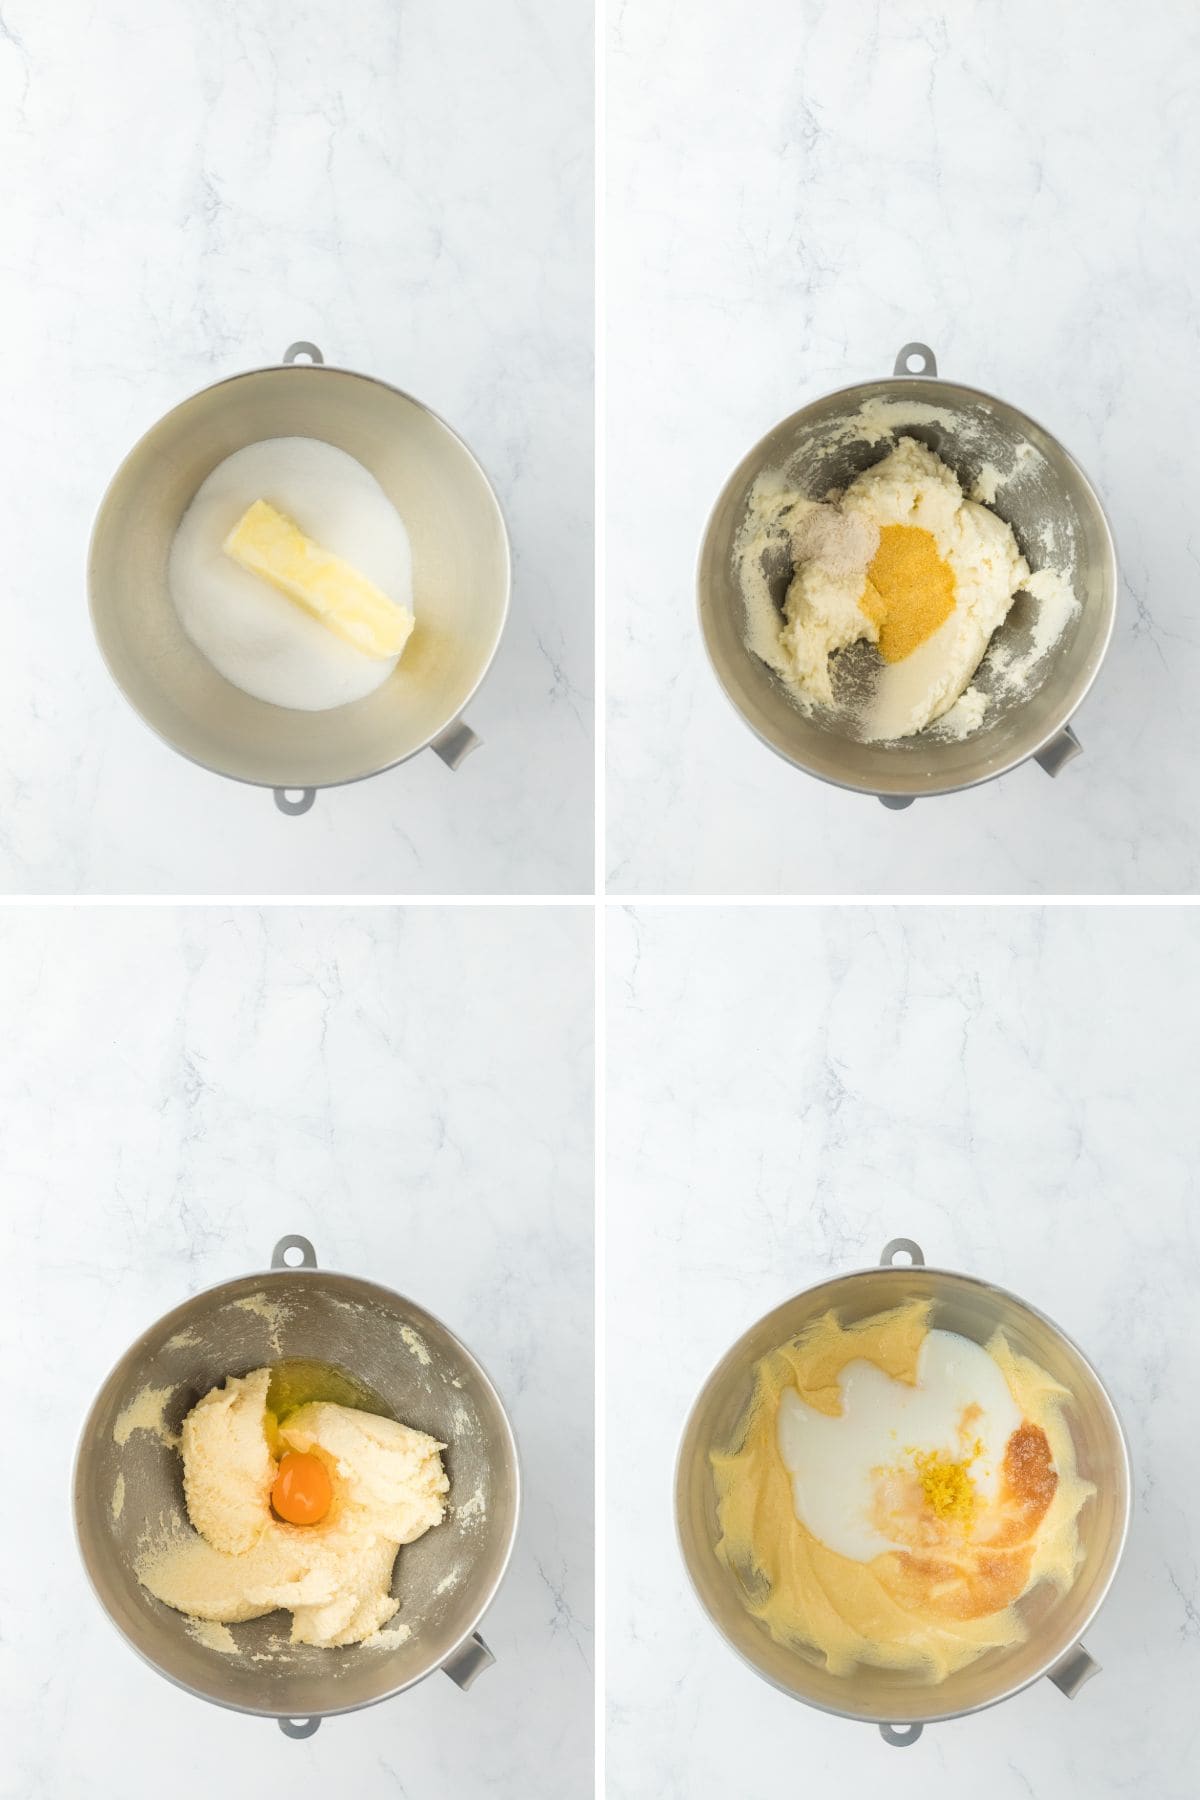 A collage of butter and sugar mixed along with eggs, vanilla, cornmeal and flour being added to make a pie filling on white background